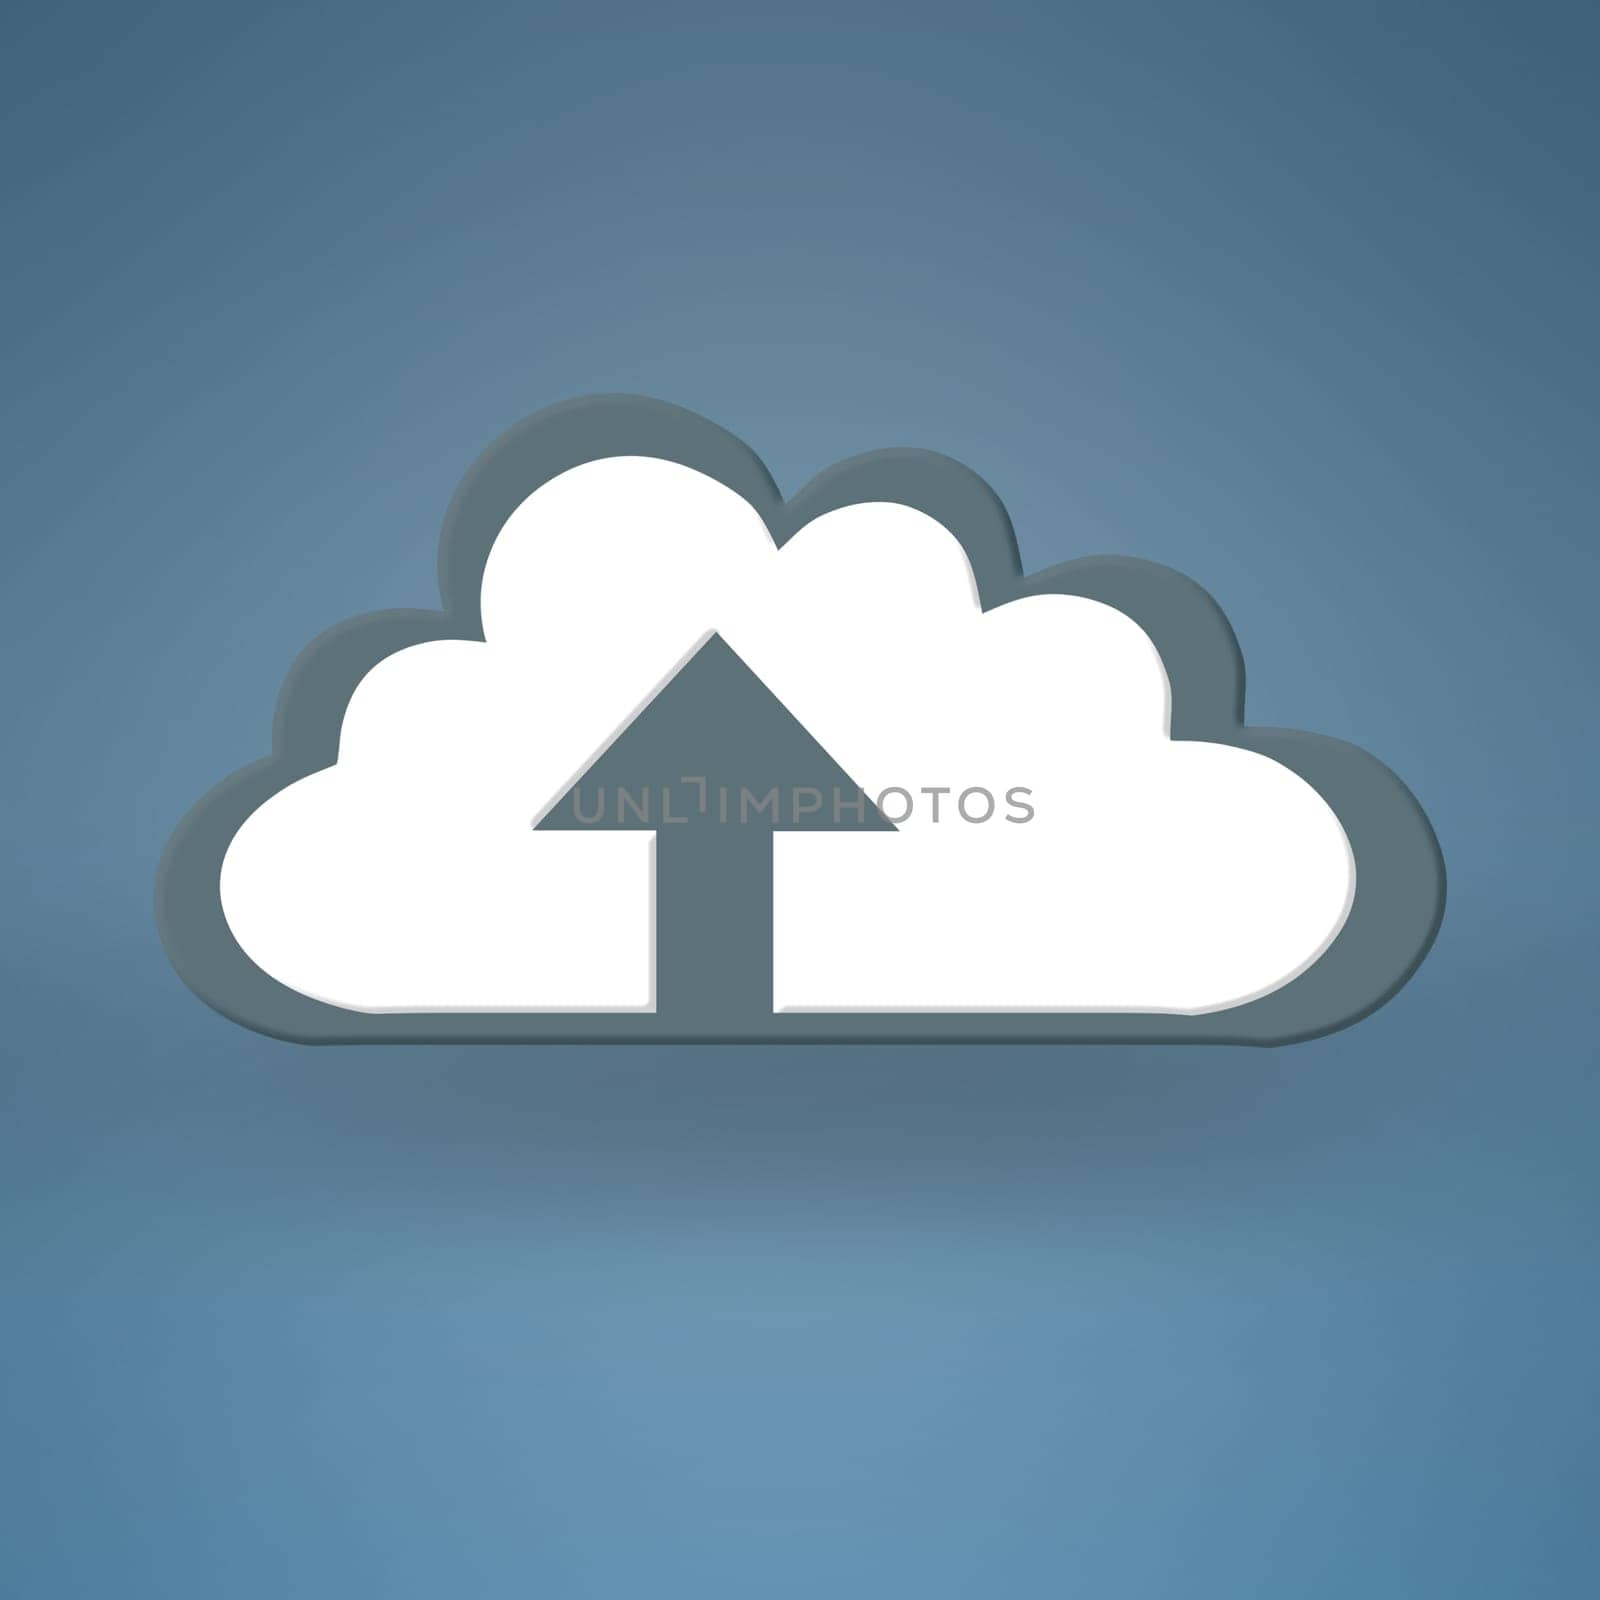 Cloud computing, graphic and arrow for upload with sign for data, information technology and art on blue background. Networking, storage icon and futuristic it for digital expansion with connectivity.